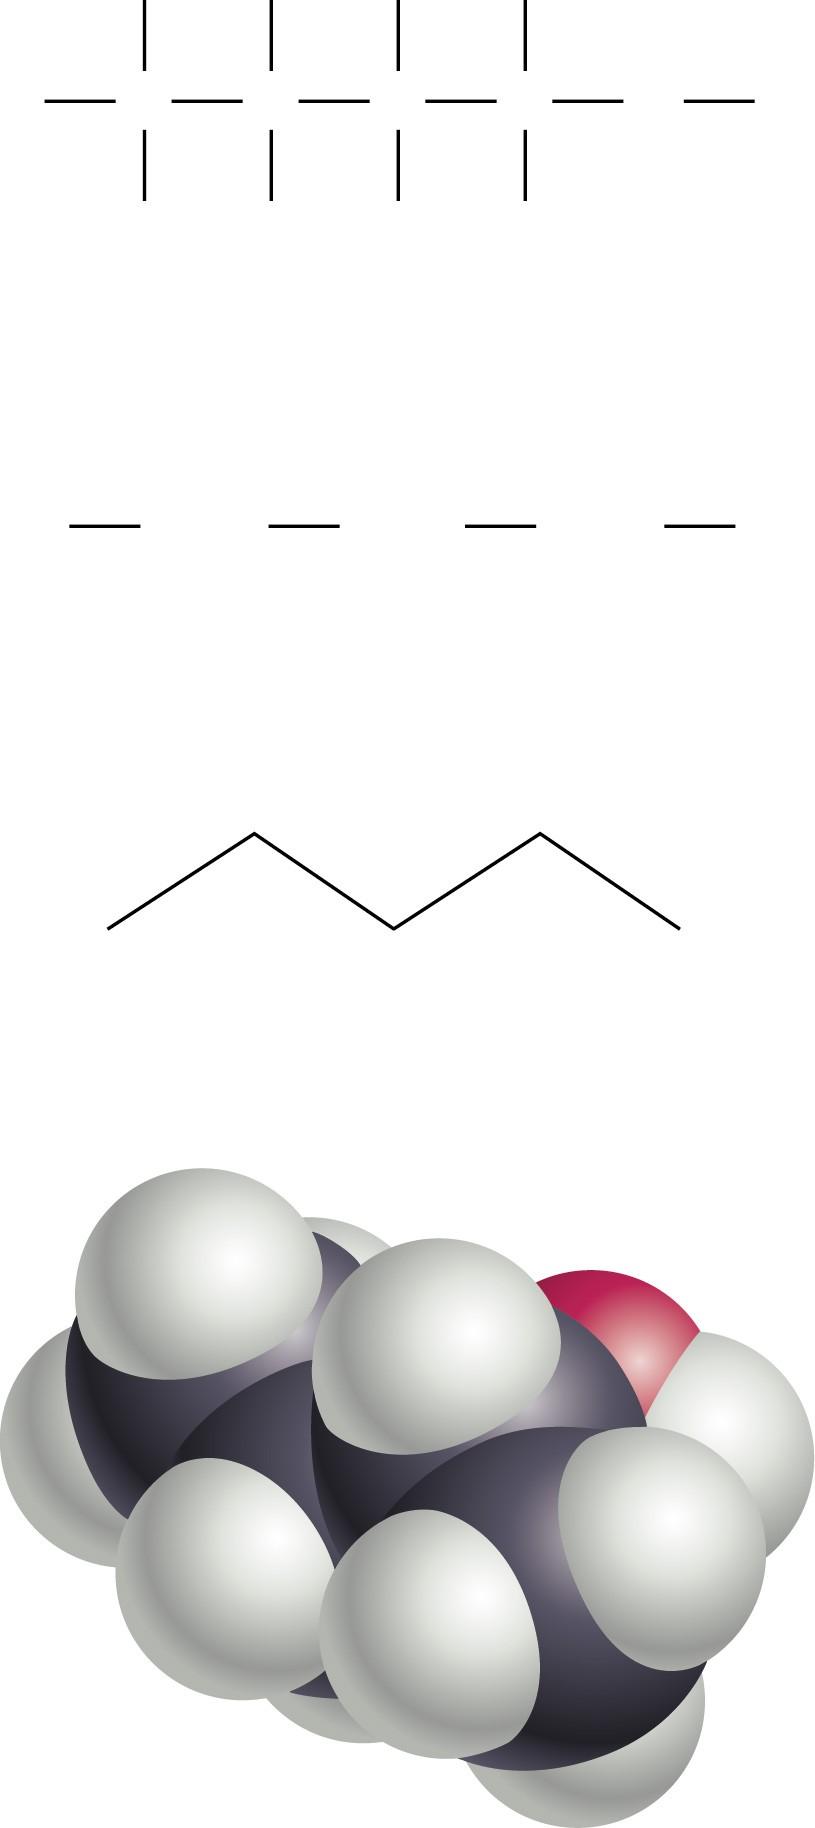 2.2 How Do Atoms Form Molecules? A molecule may be depicted in different ways.